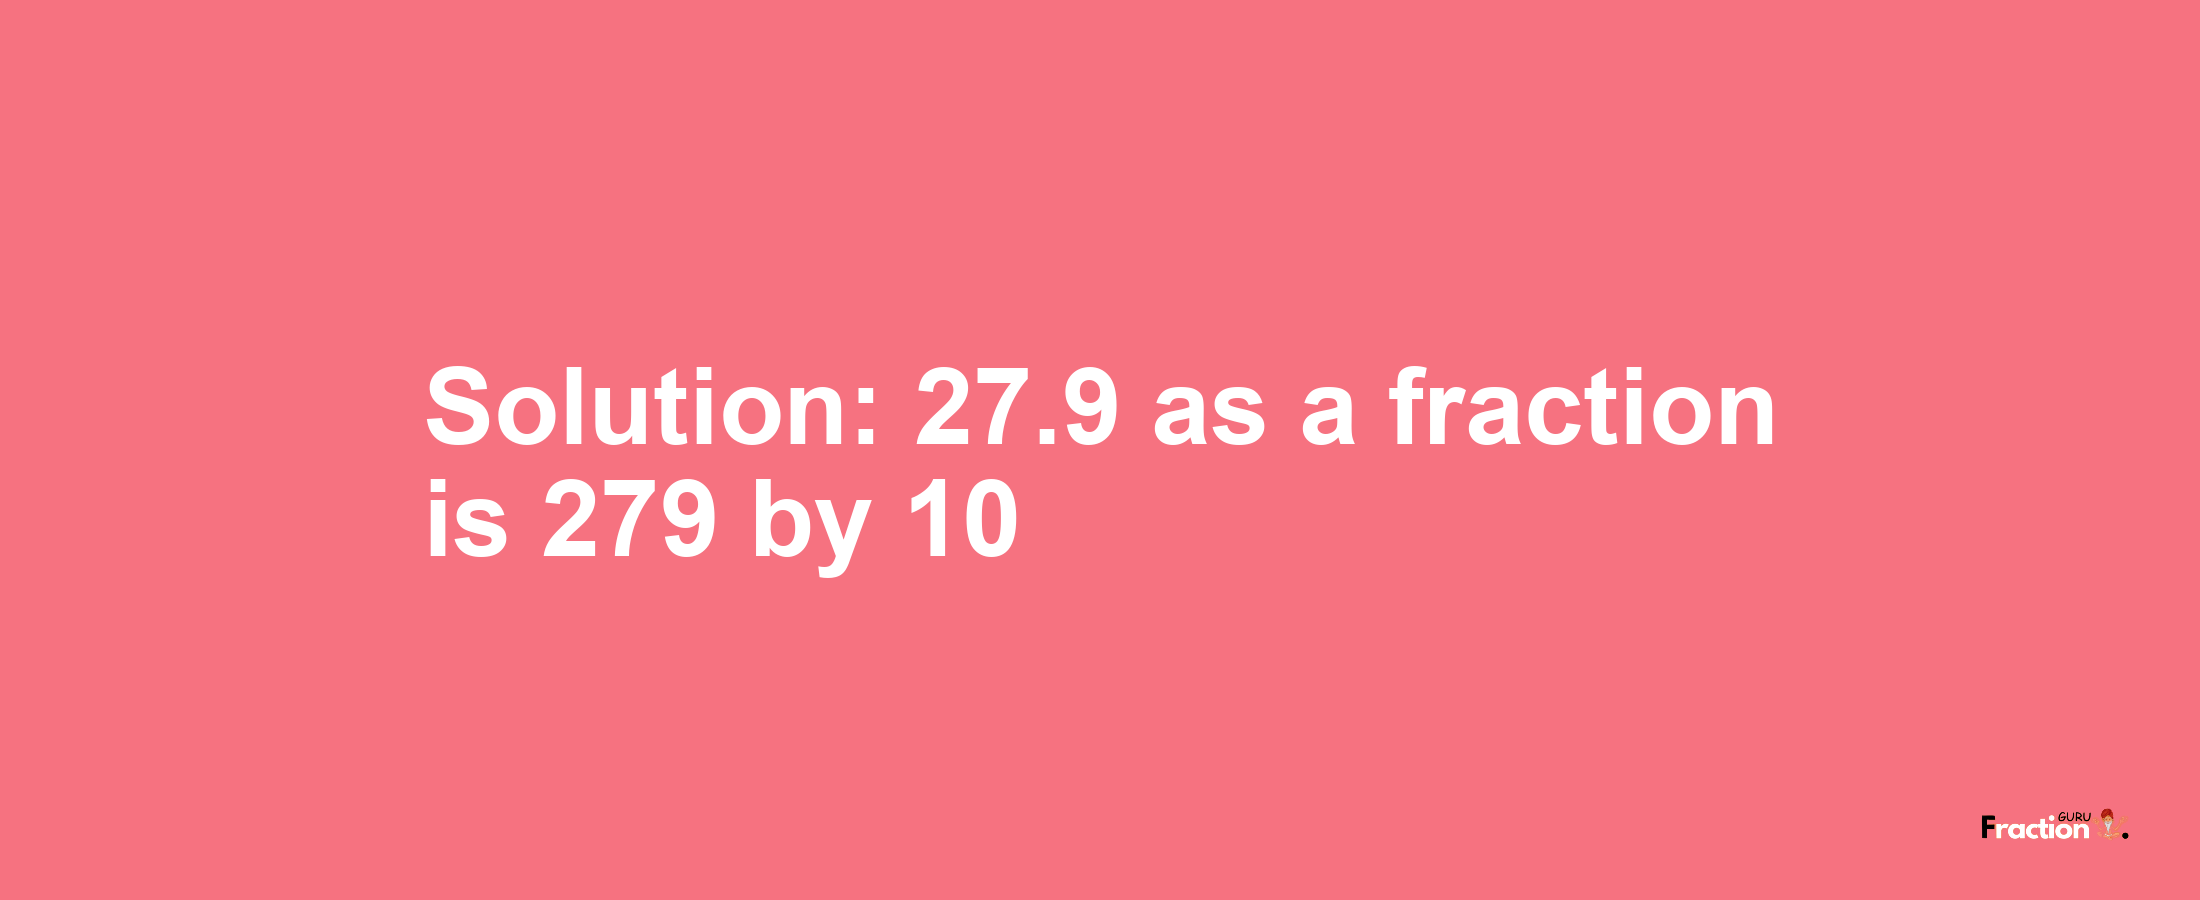 Solution:27.9 as a fraction is 279/10